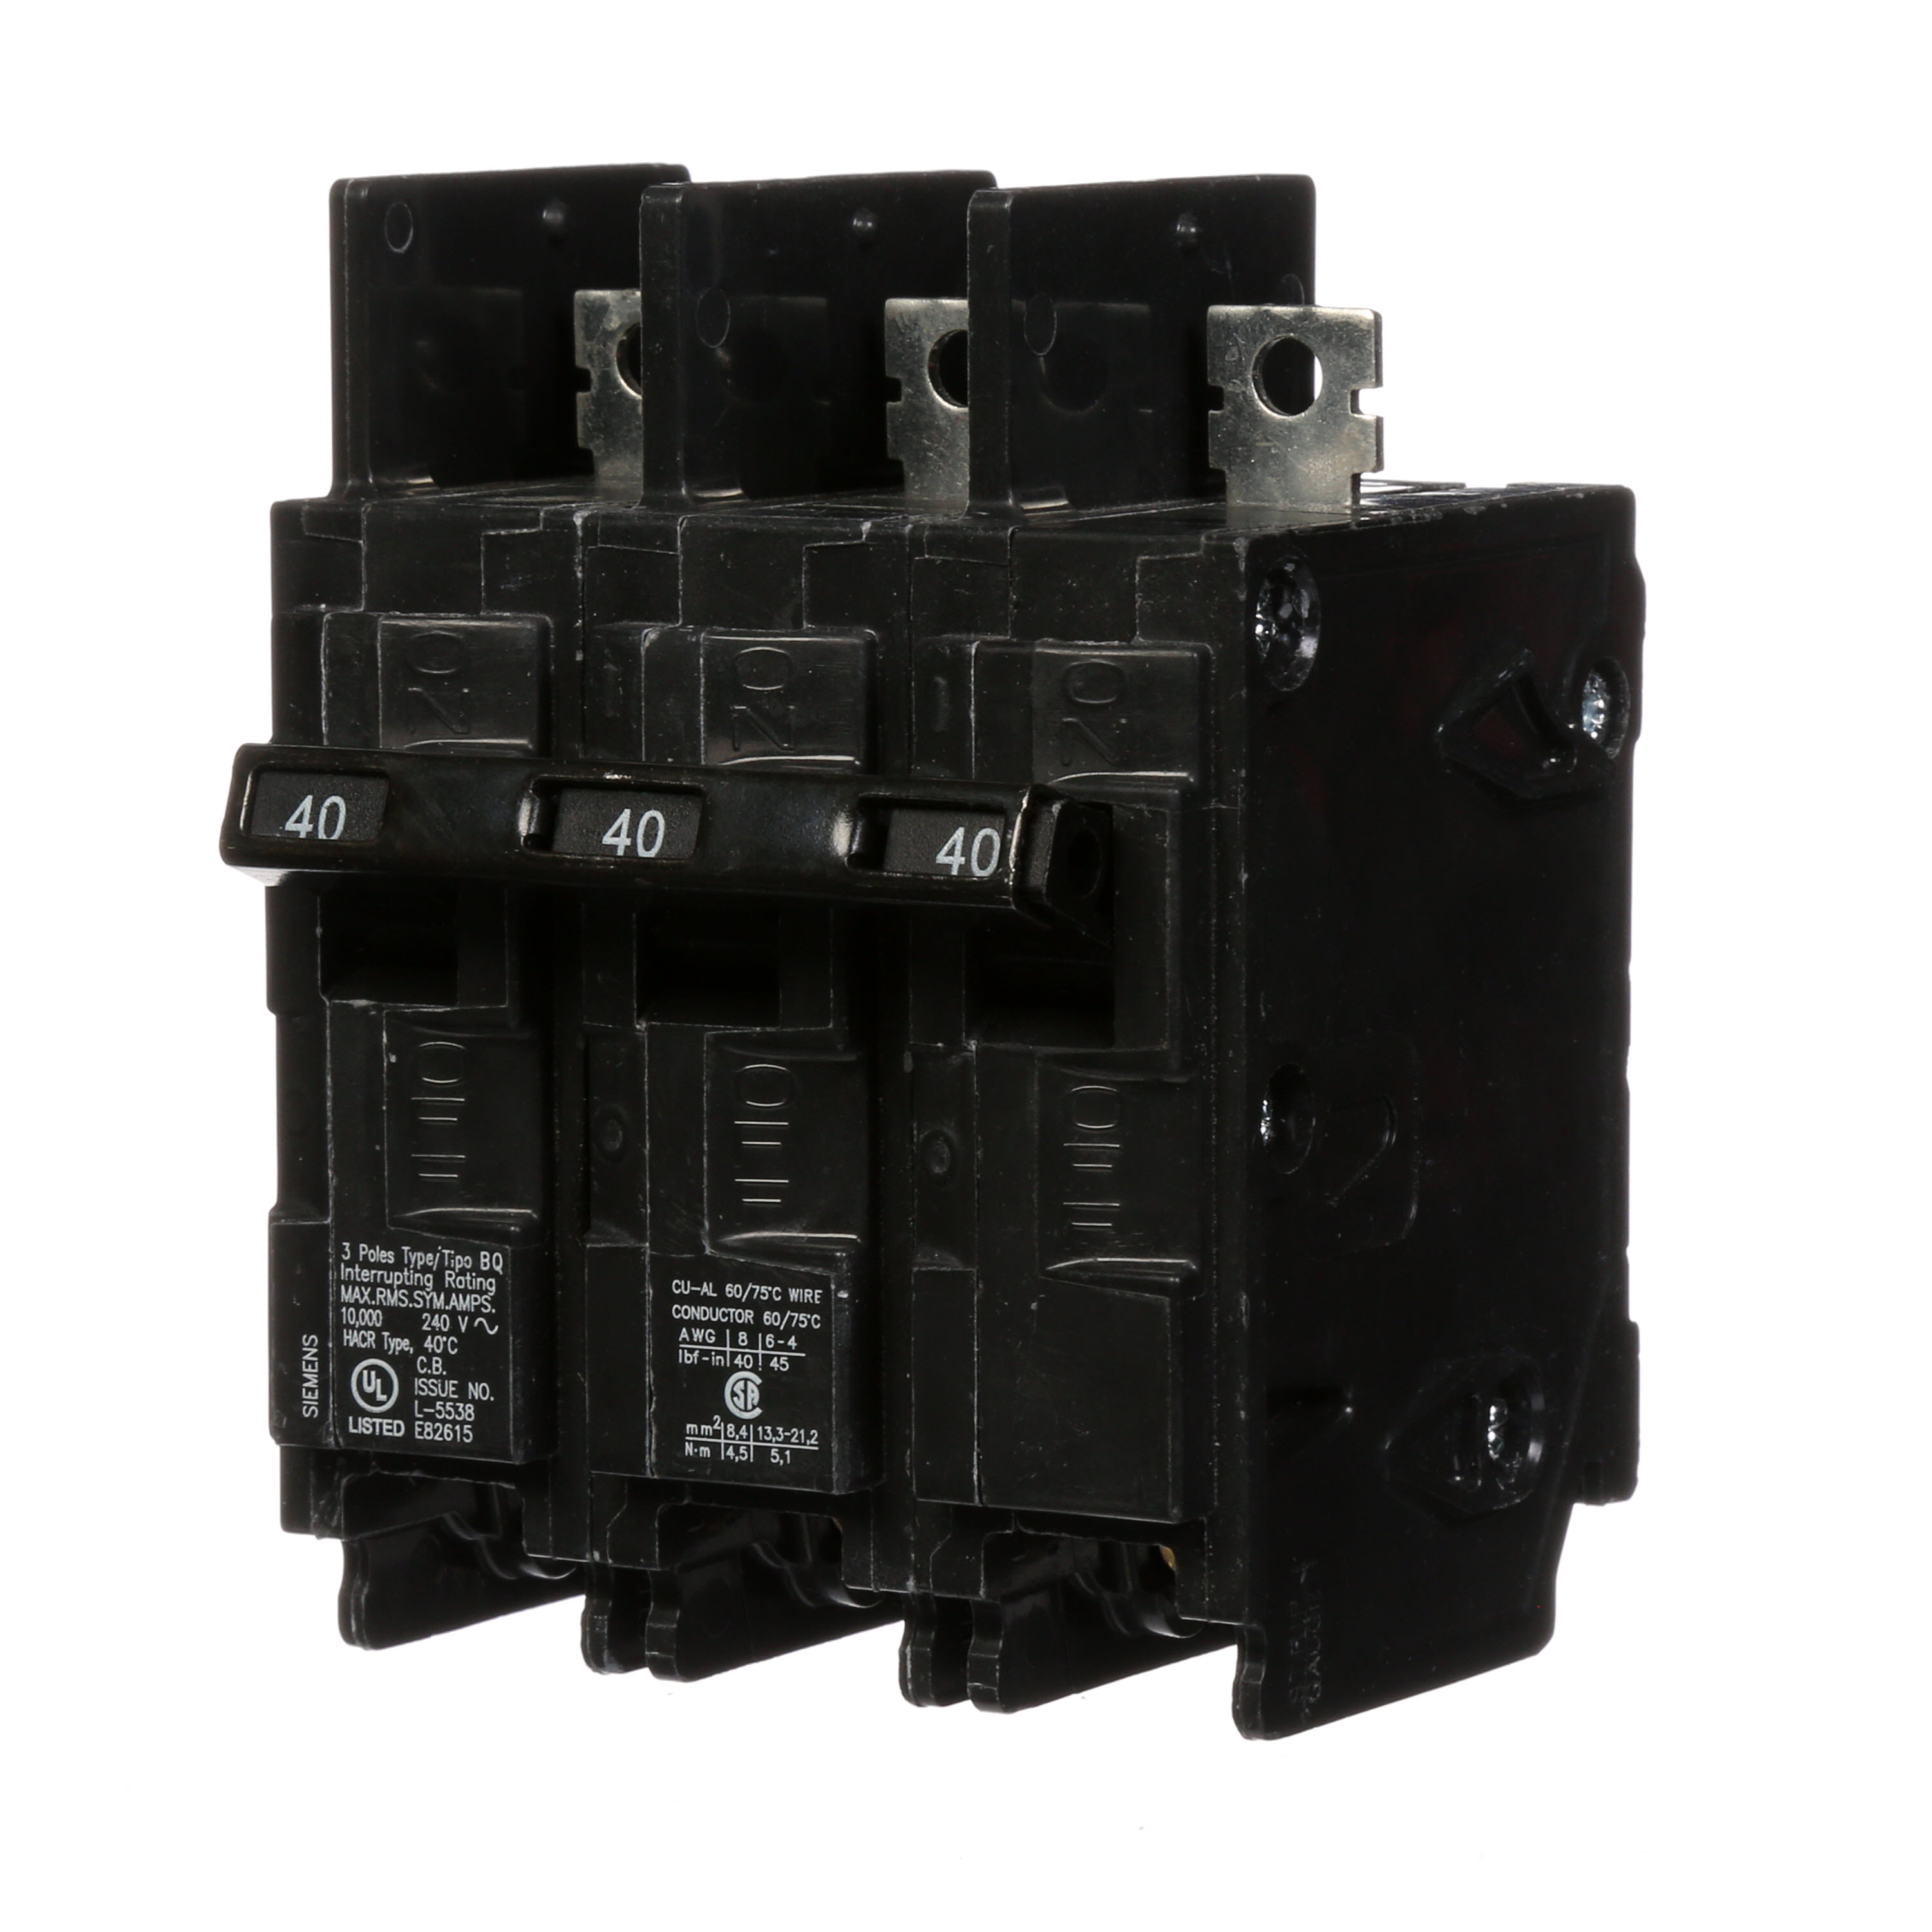 Siemens Low Voltage Molded Case Circuit Breakers General Purpose MCCBs are Circuit Protection Molded Case Circuit Breakers. 3-Pole Common-Trip circuit breaker type BQ. Rated 240V (040A) (AIR 10 kA). Special features Load side lugs are included.